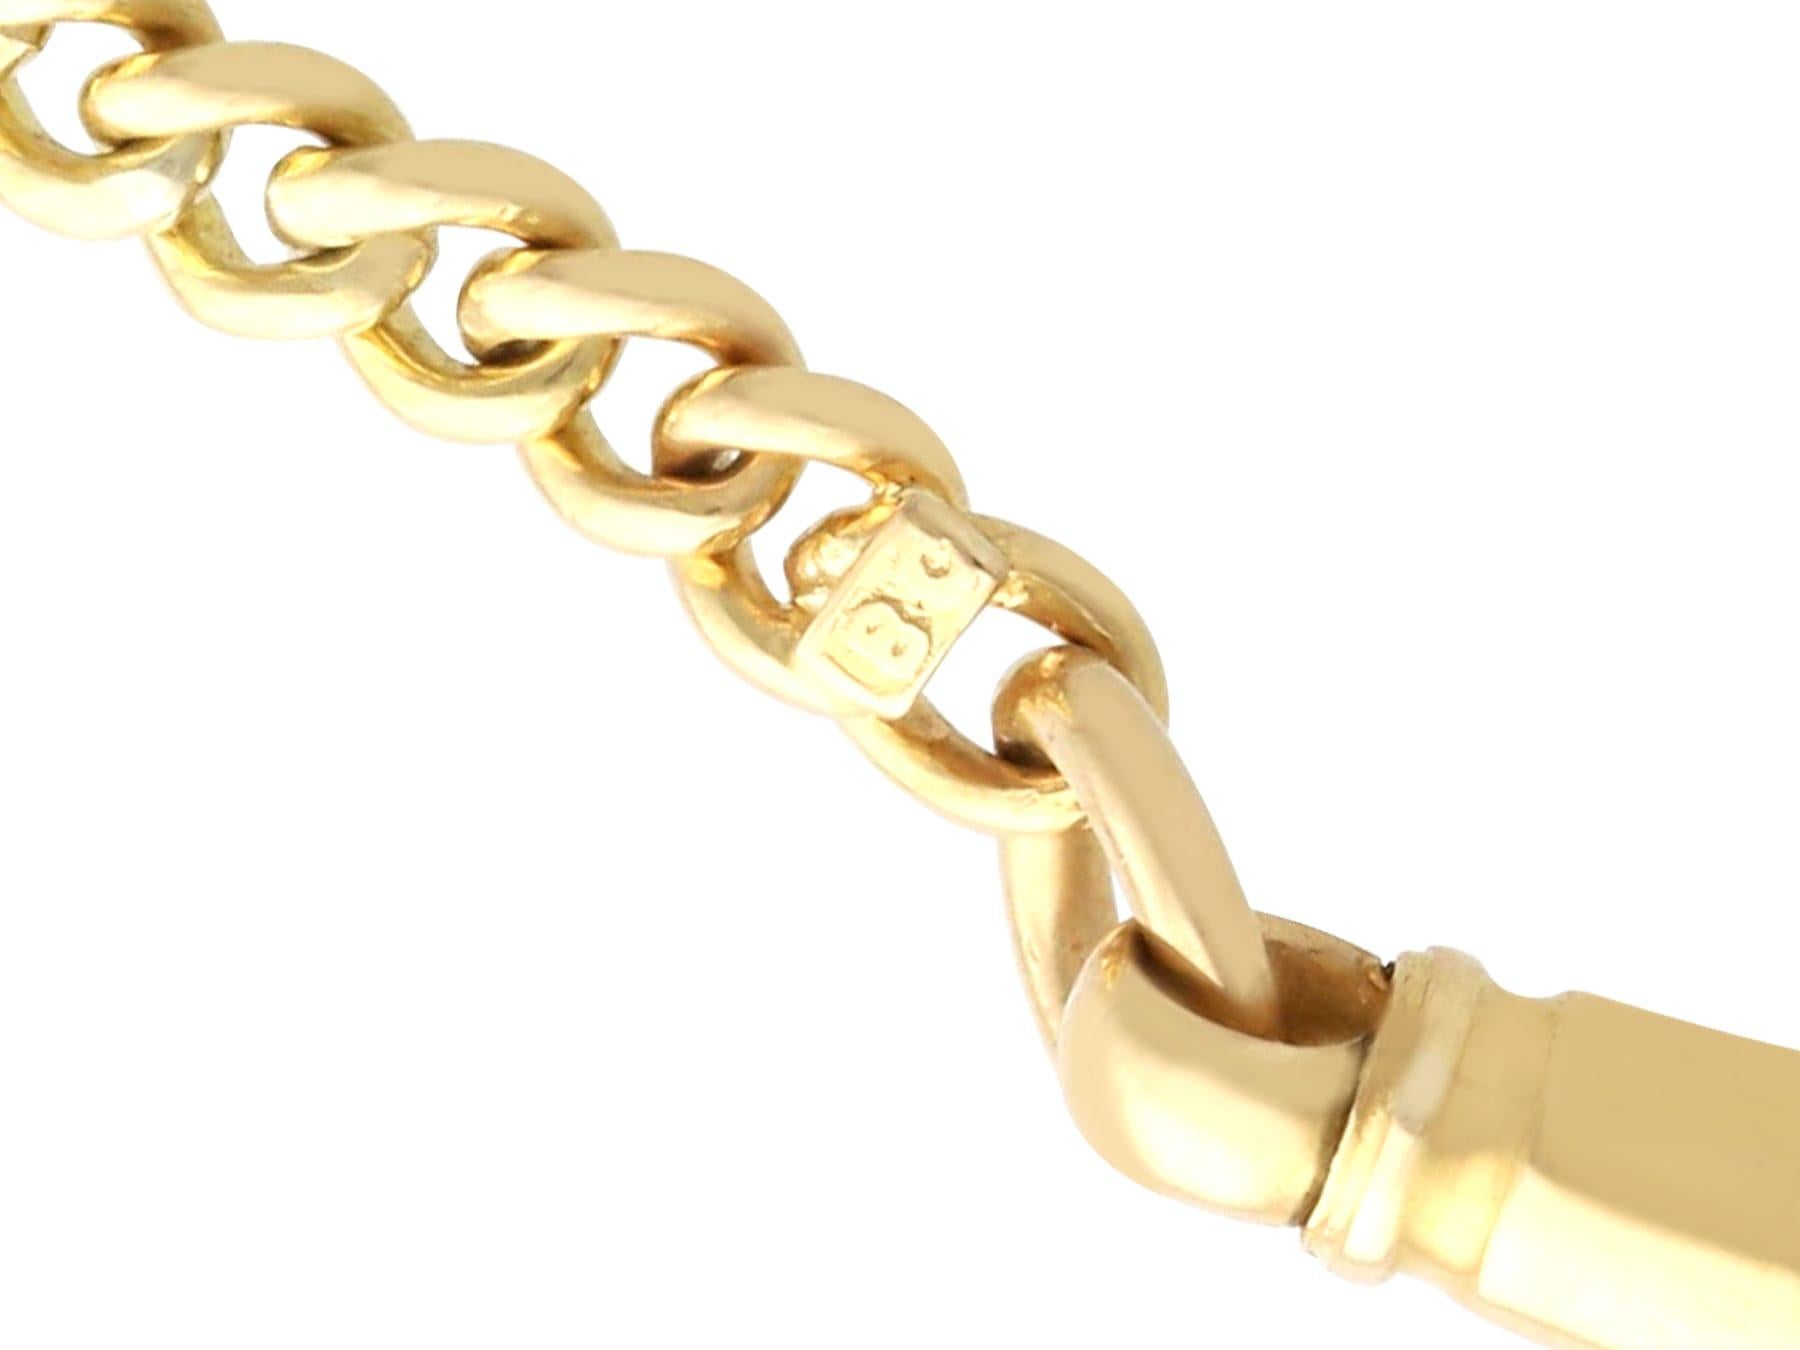 Women's or Men's Antique 18k Yellow Gold and Platinum Ladies Fob Watch Chain Circa 1910 For Sale